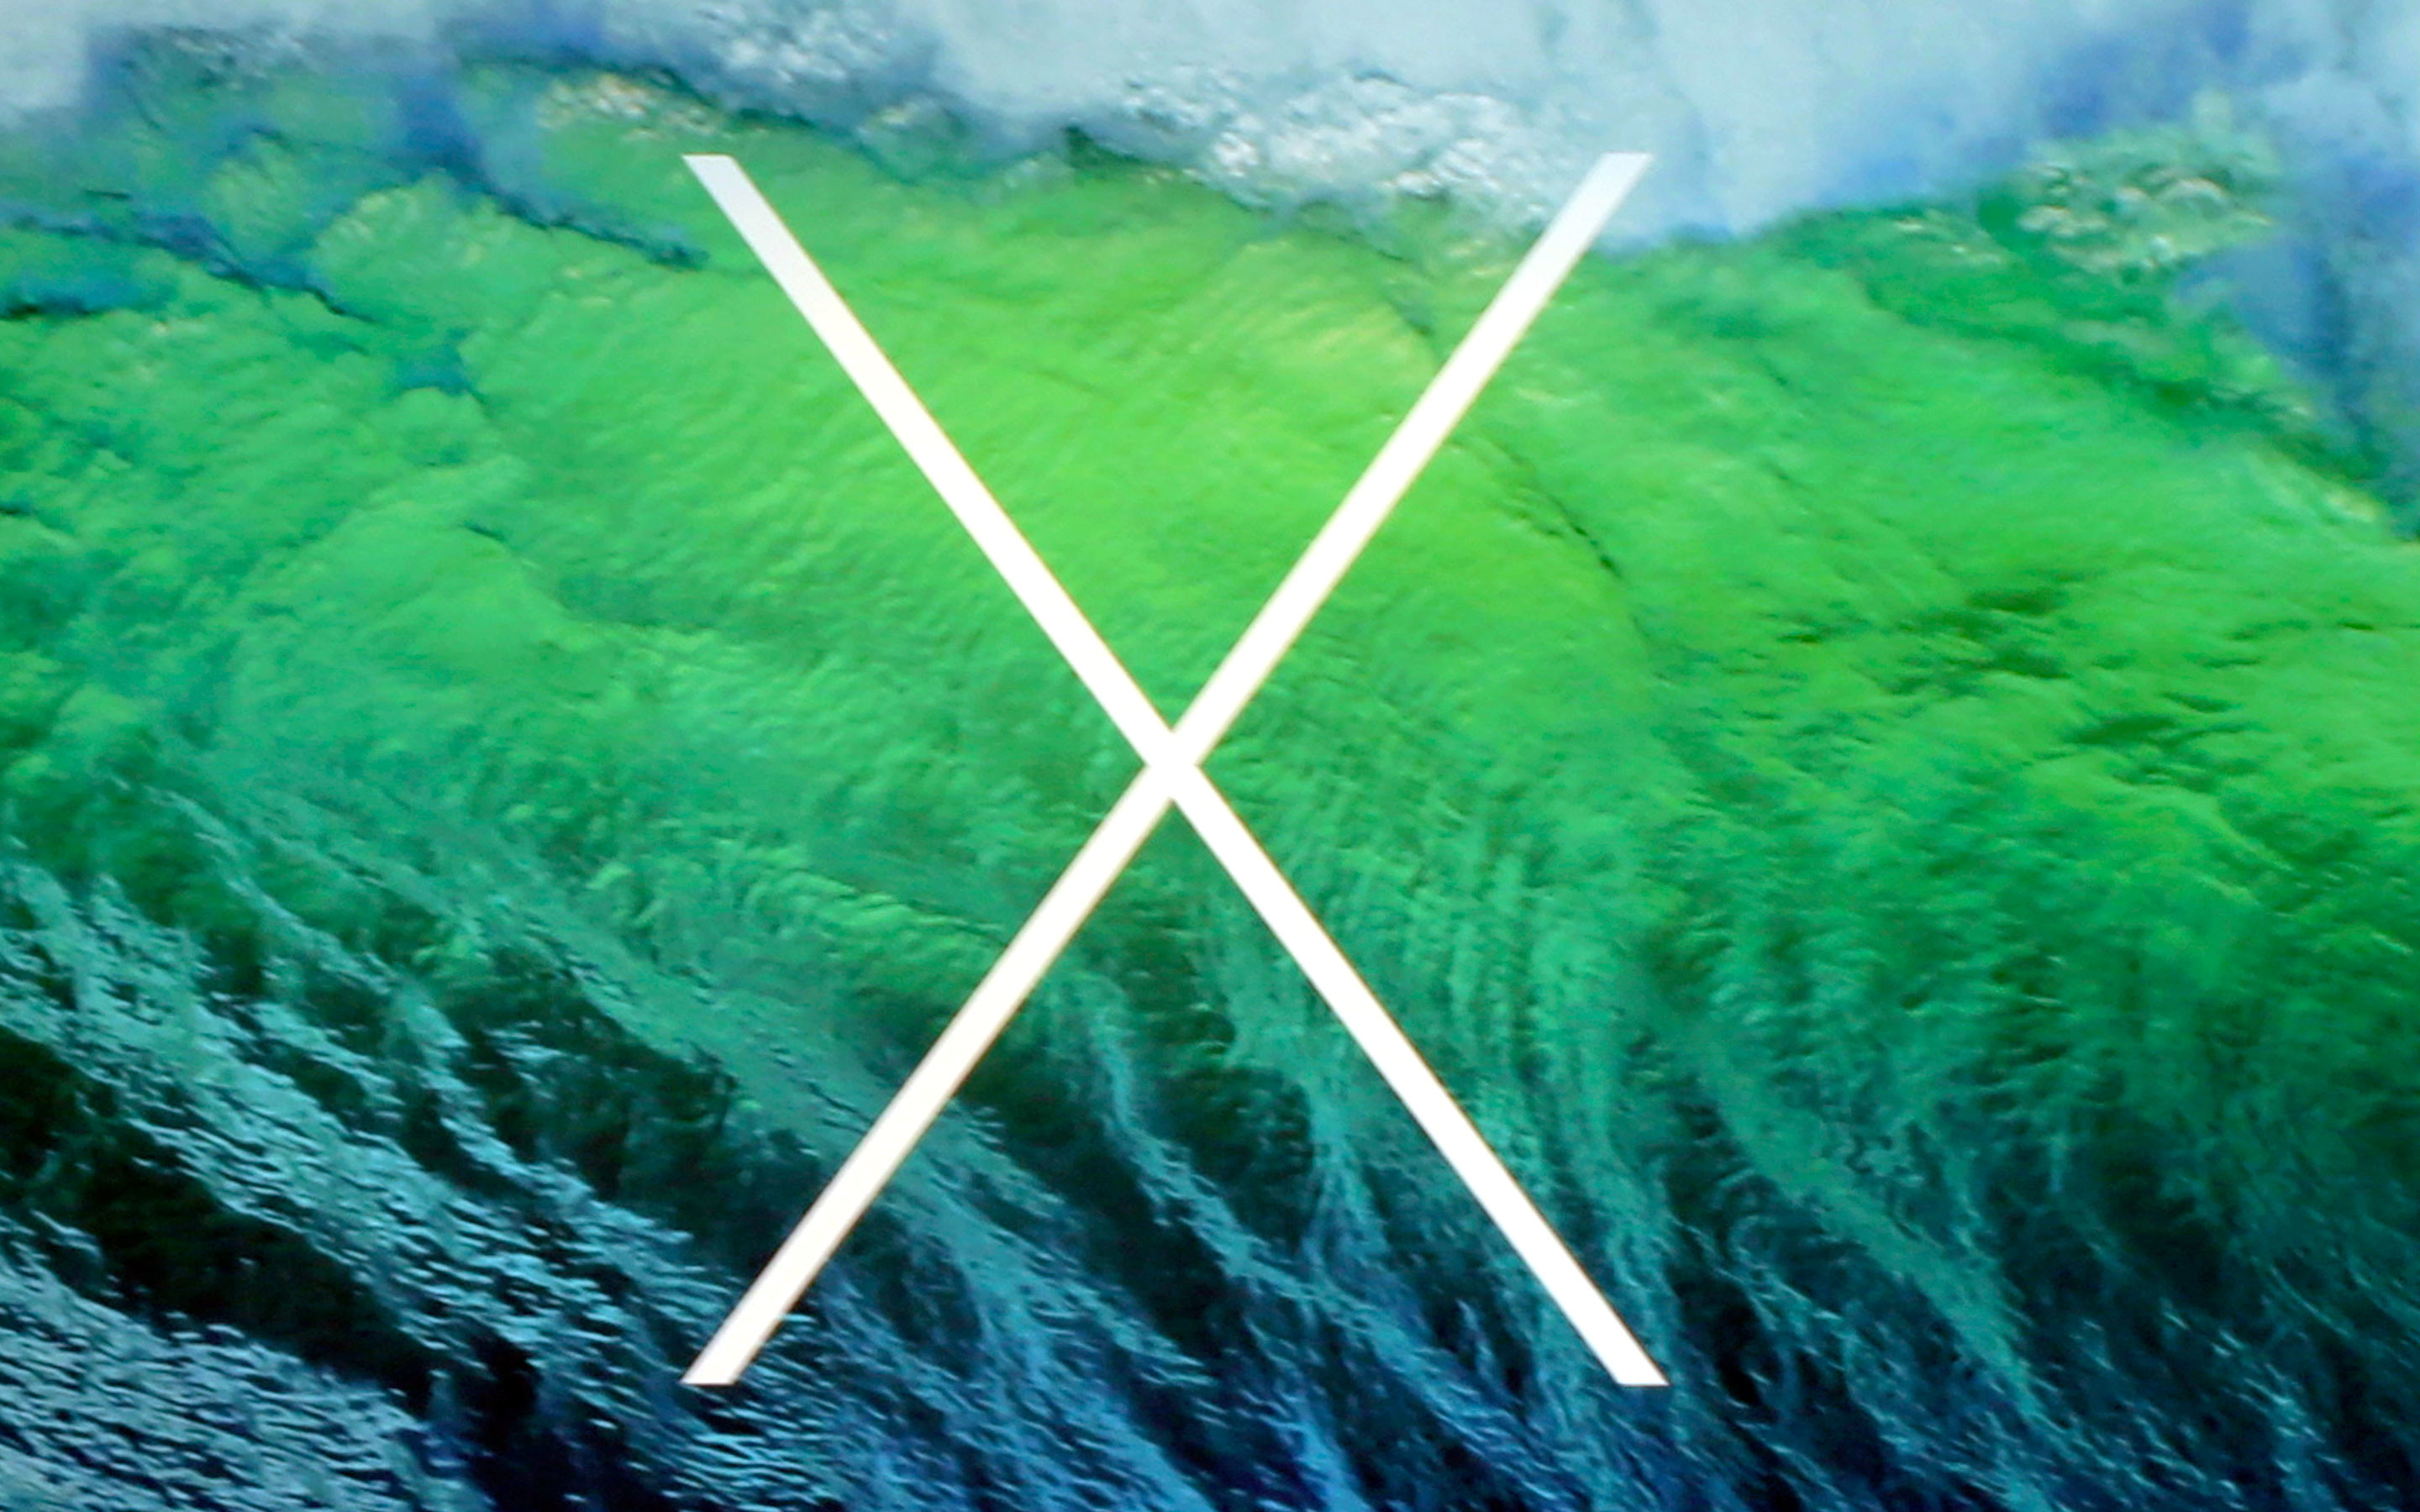 iOS 7 dots, OS X 10.9 wave, and more WWDC 2013 banners — plus wallpaper!